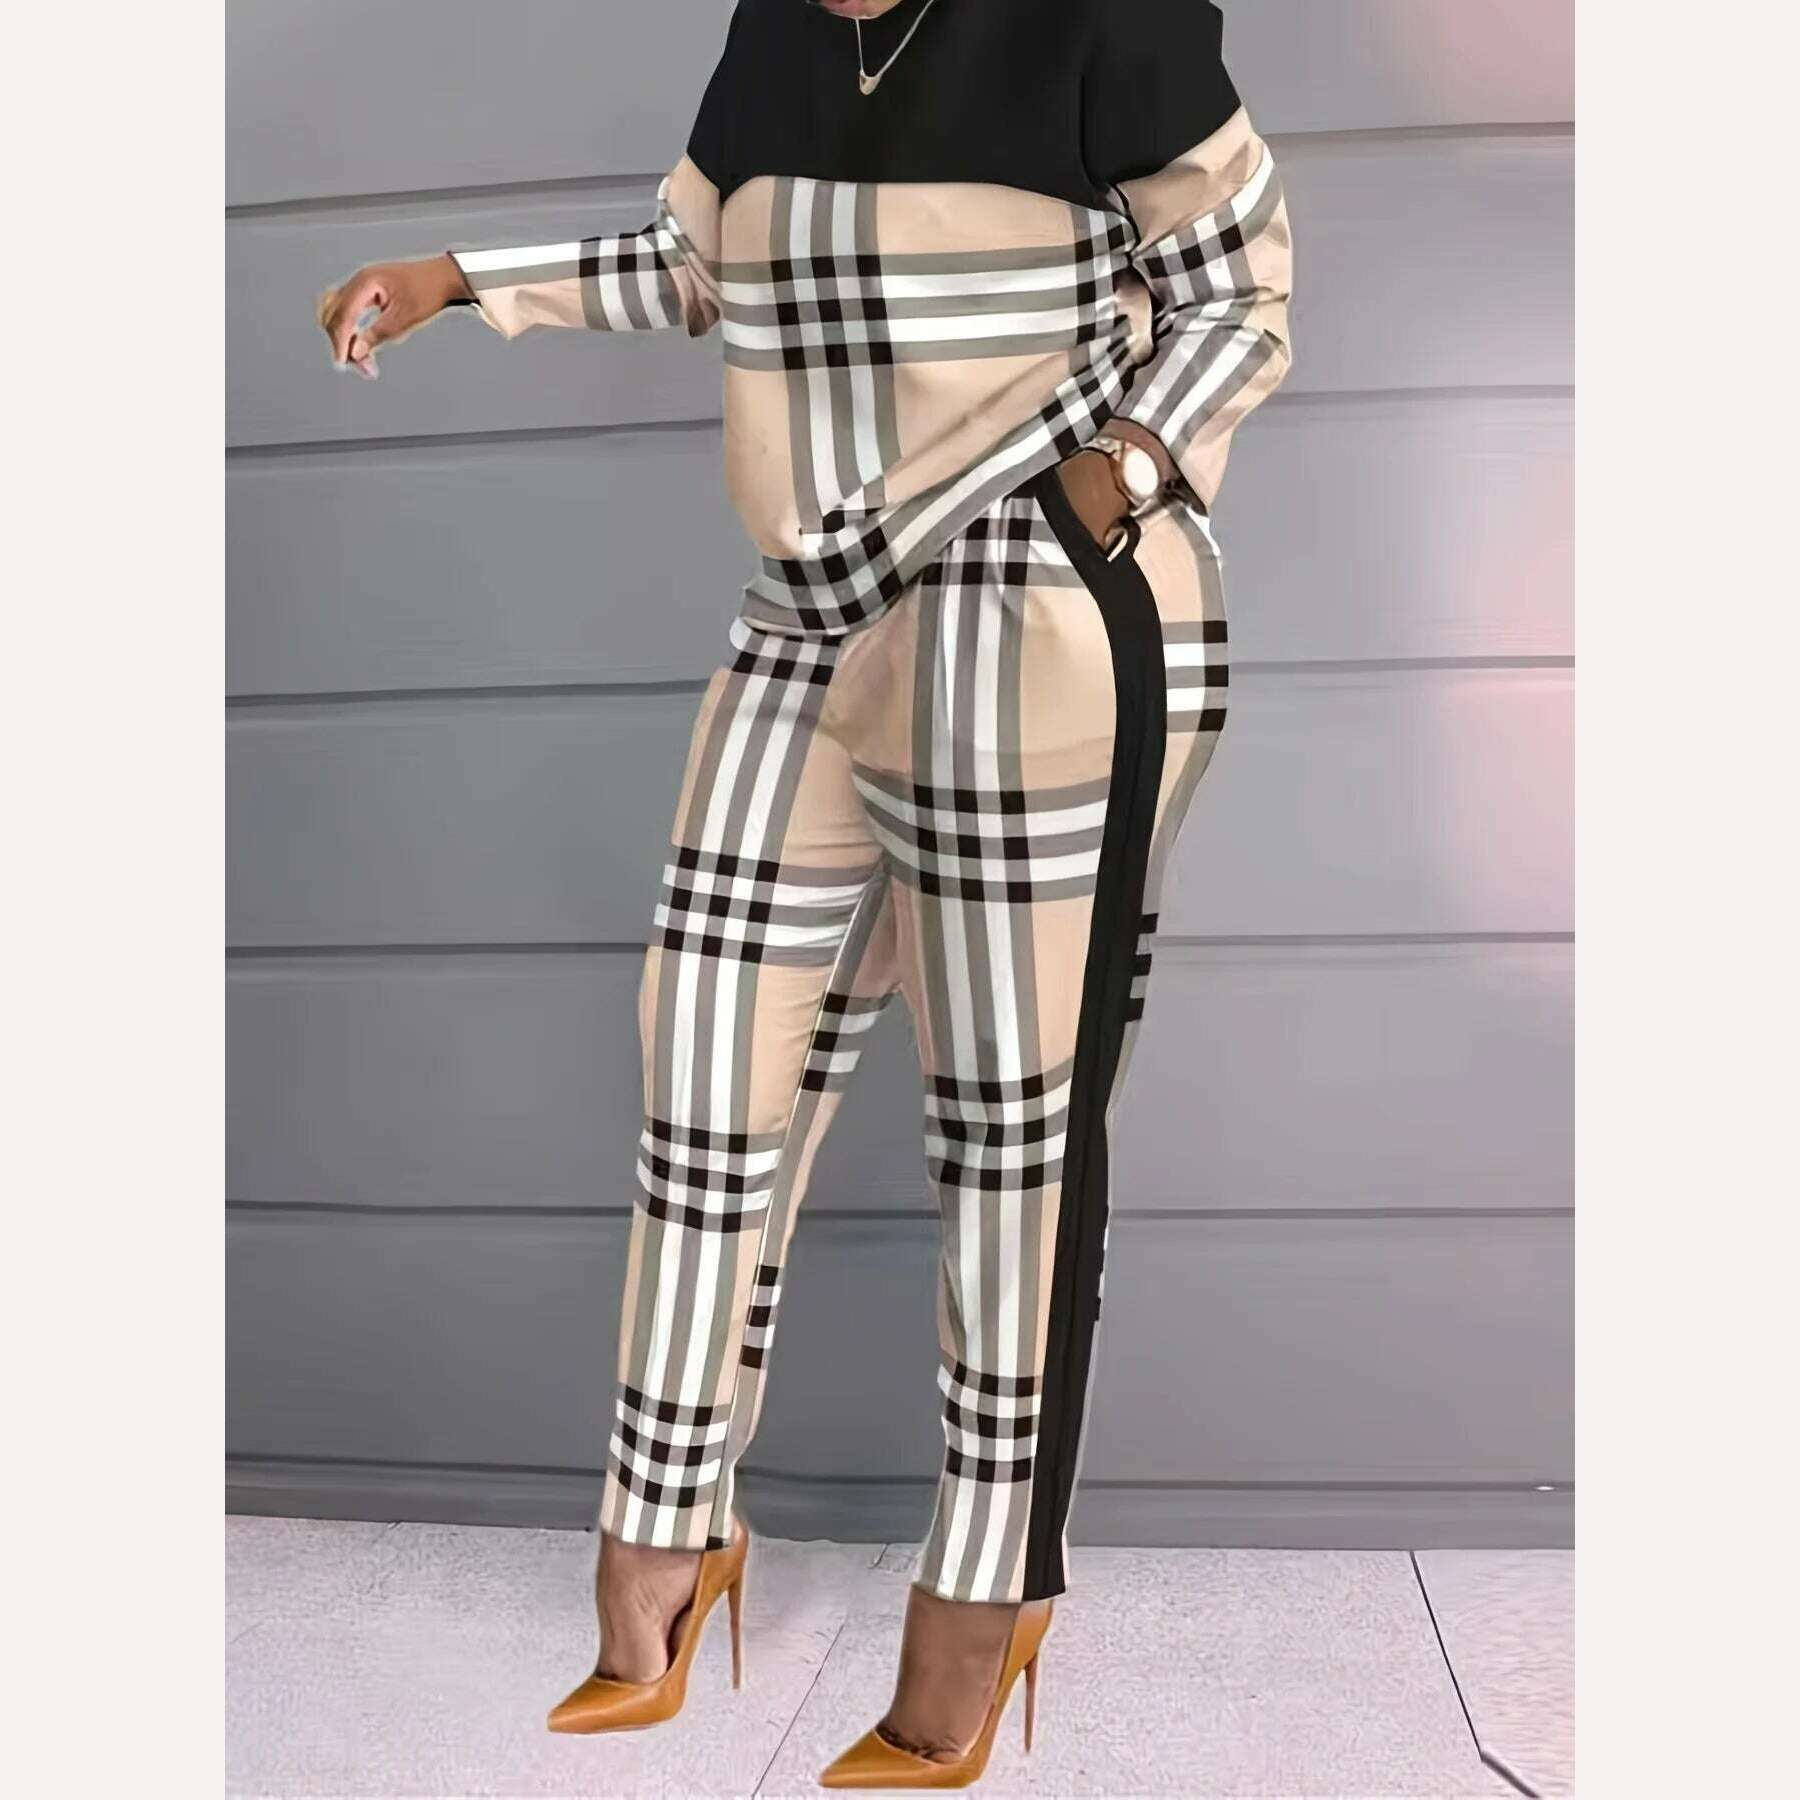 KIMLUD, European And American Fashion Women's Color Contrast Plaid Patchwork Casual Long-sleeved Two-piece Suit, KIMLUD Women's Clothes